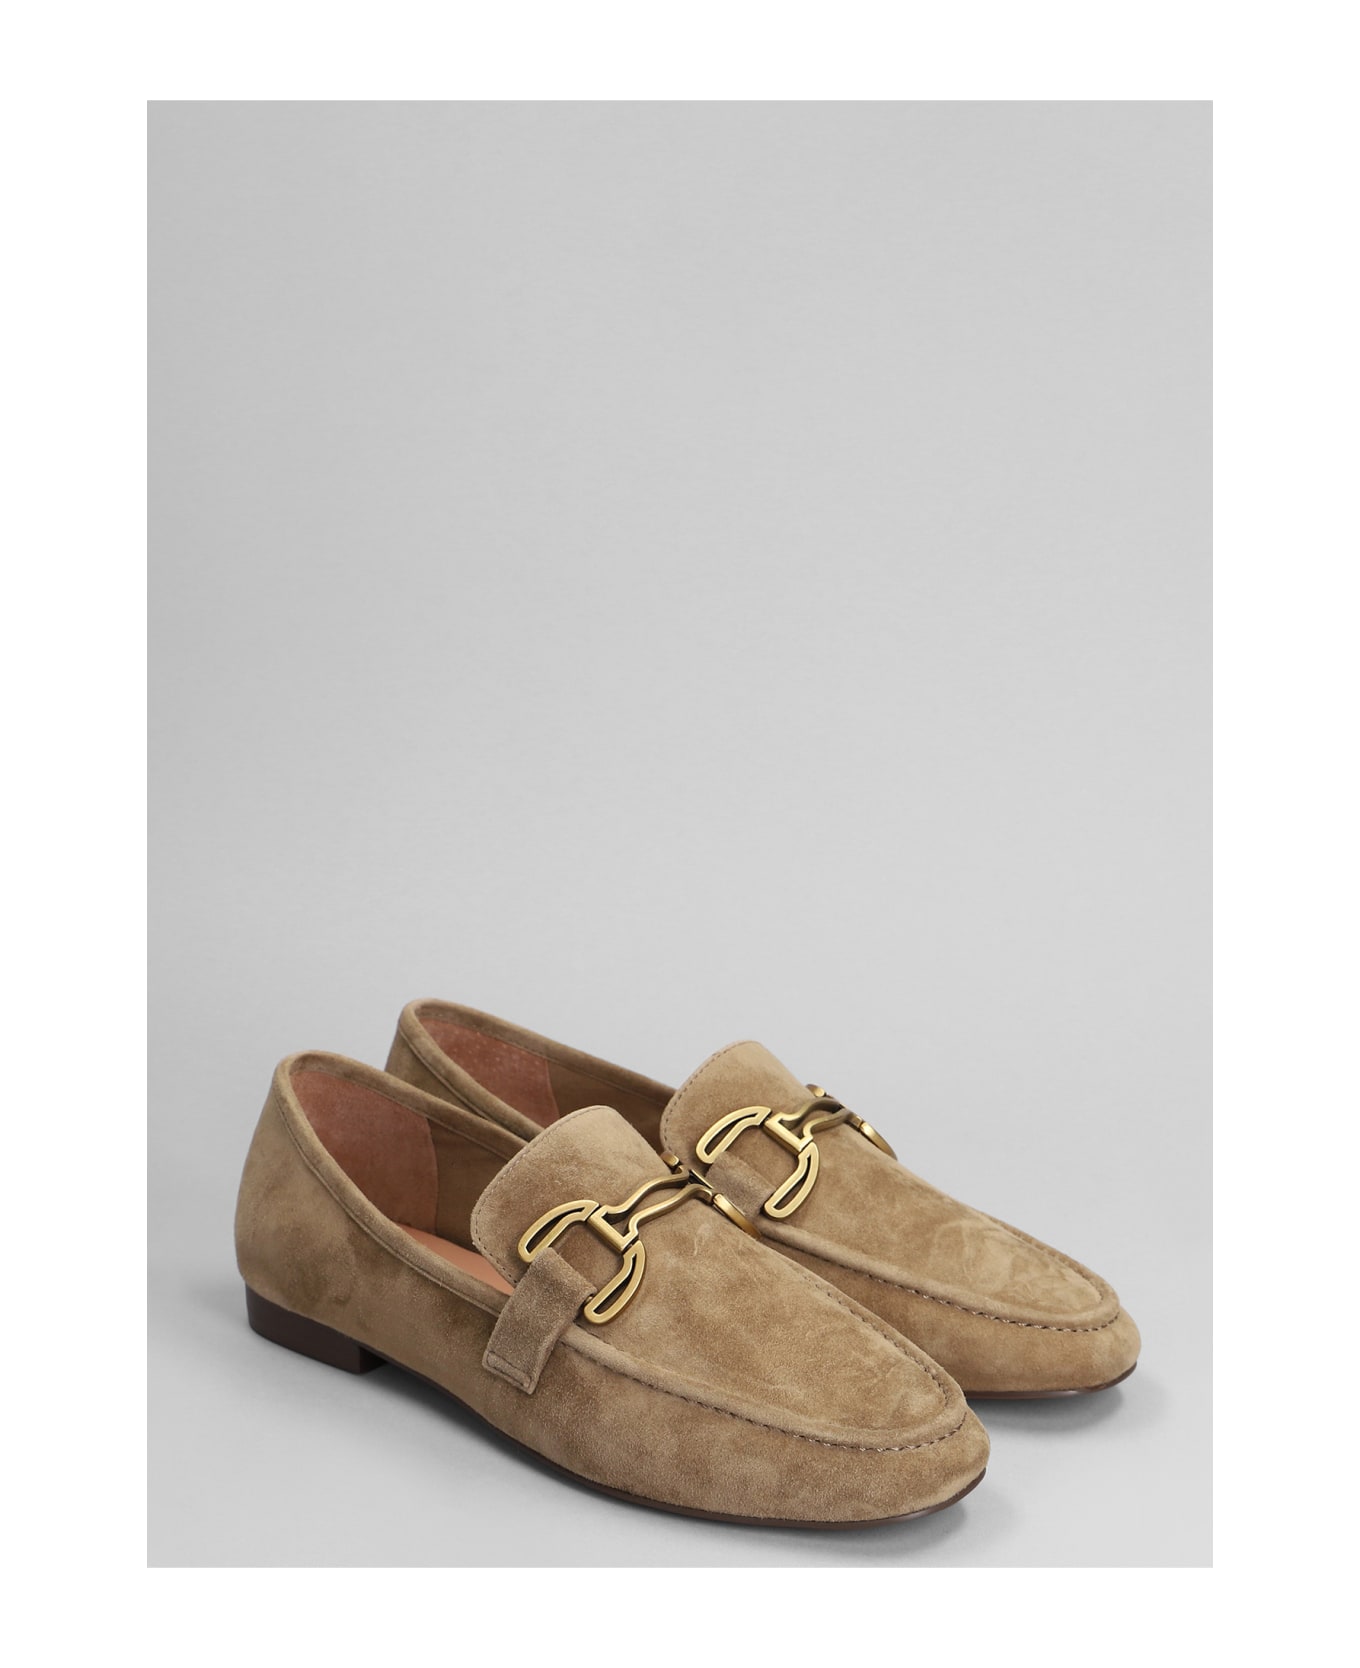 Bibi Lou Zagreb Ii Loafers In Taupe Suede - taupe フラットシューズ